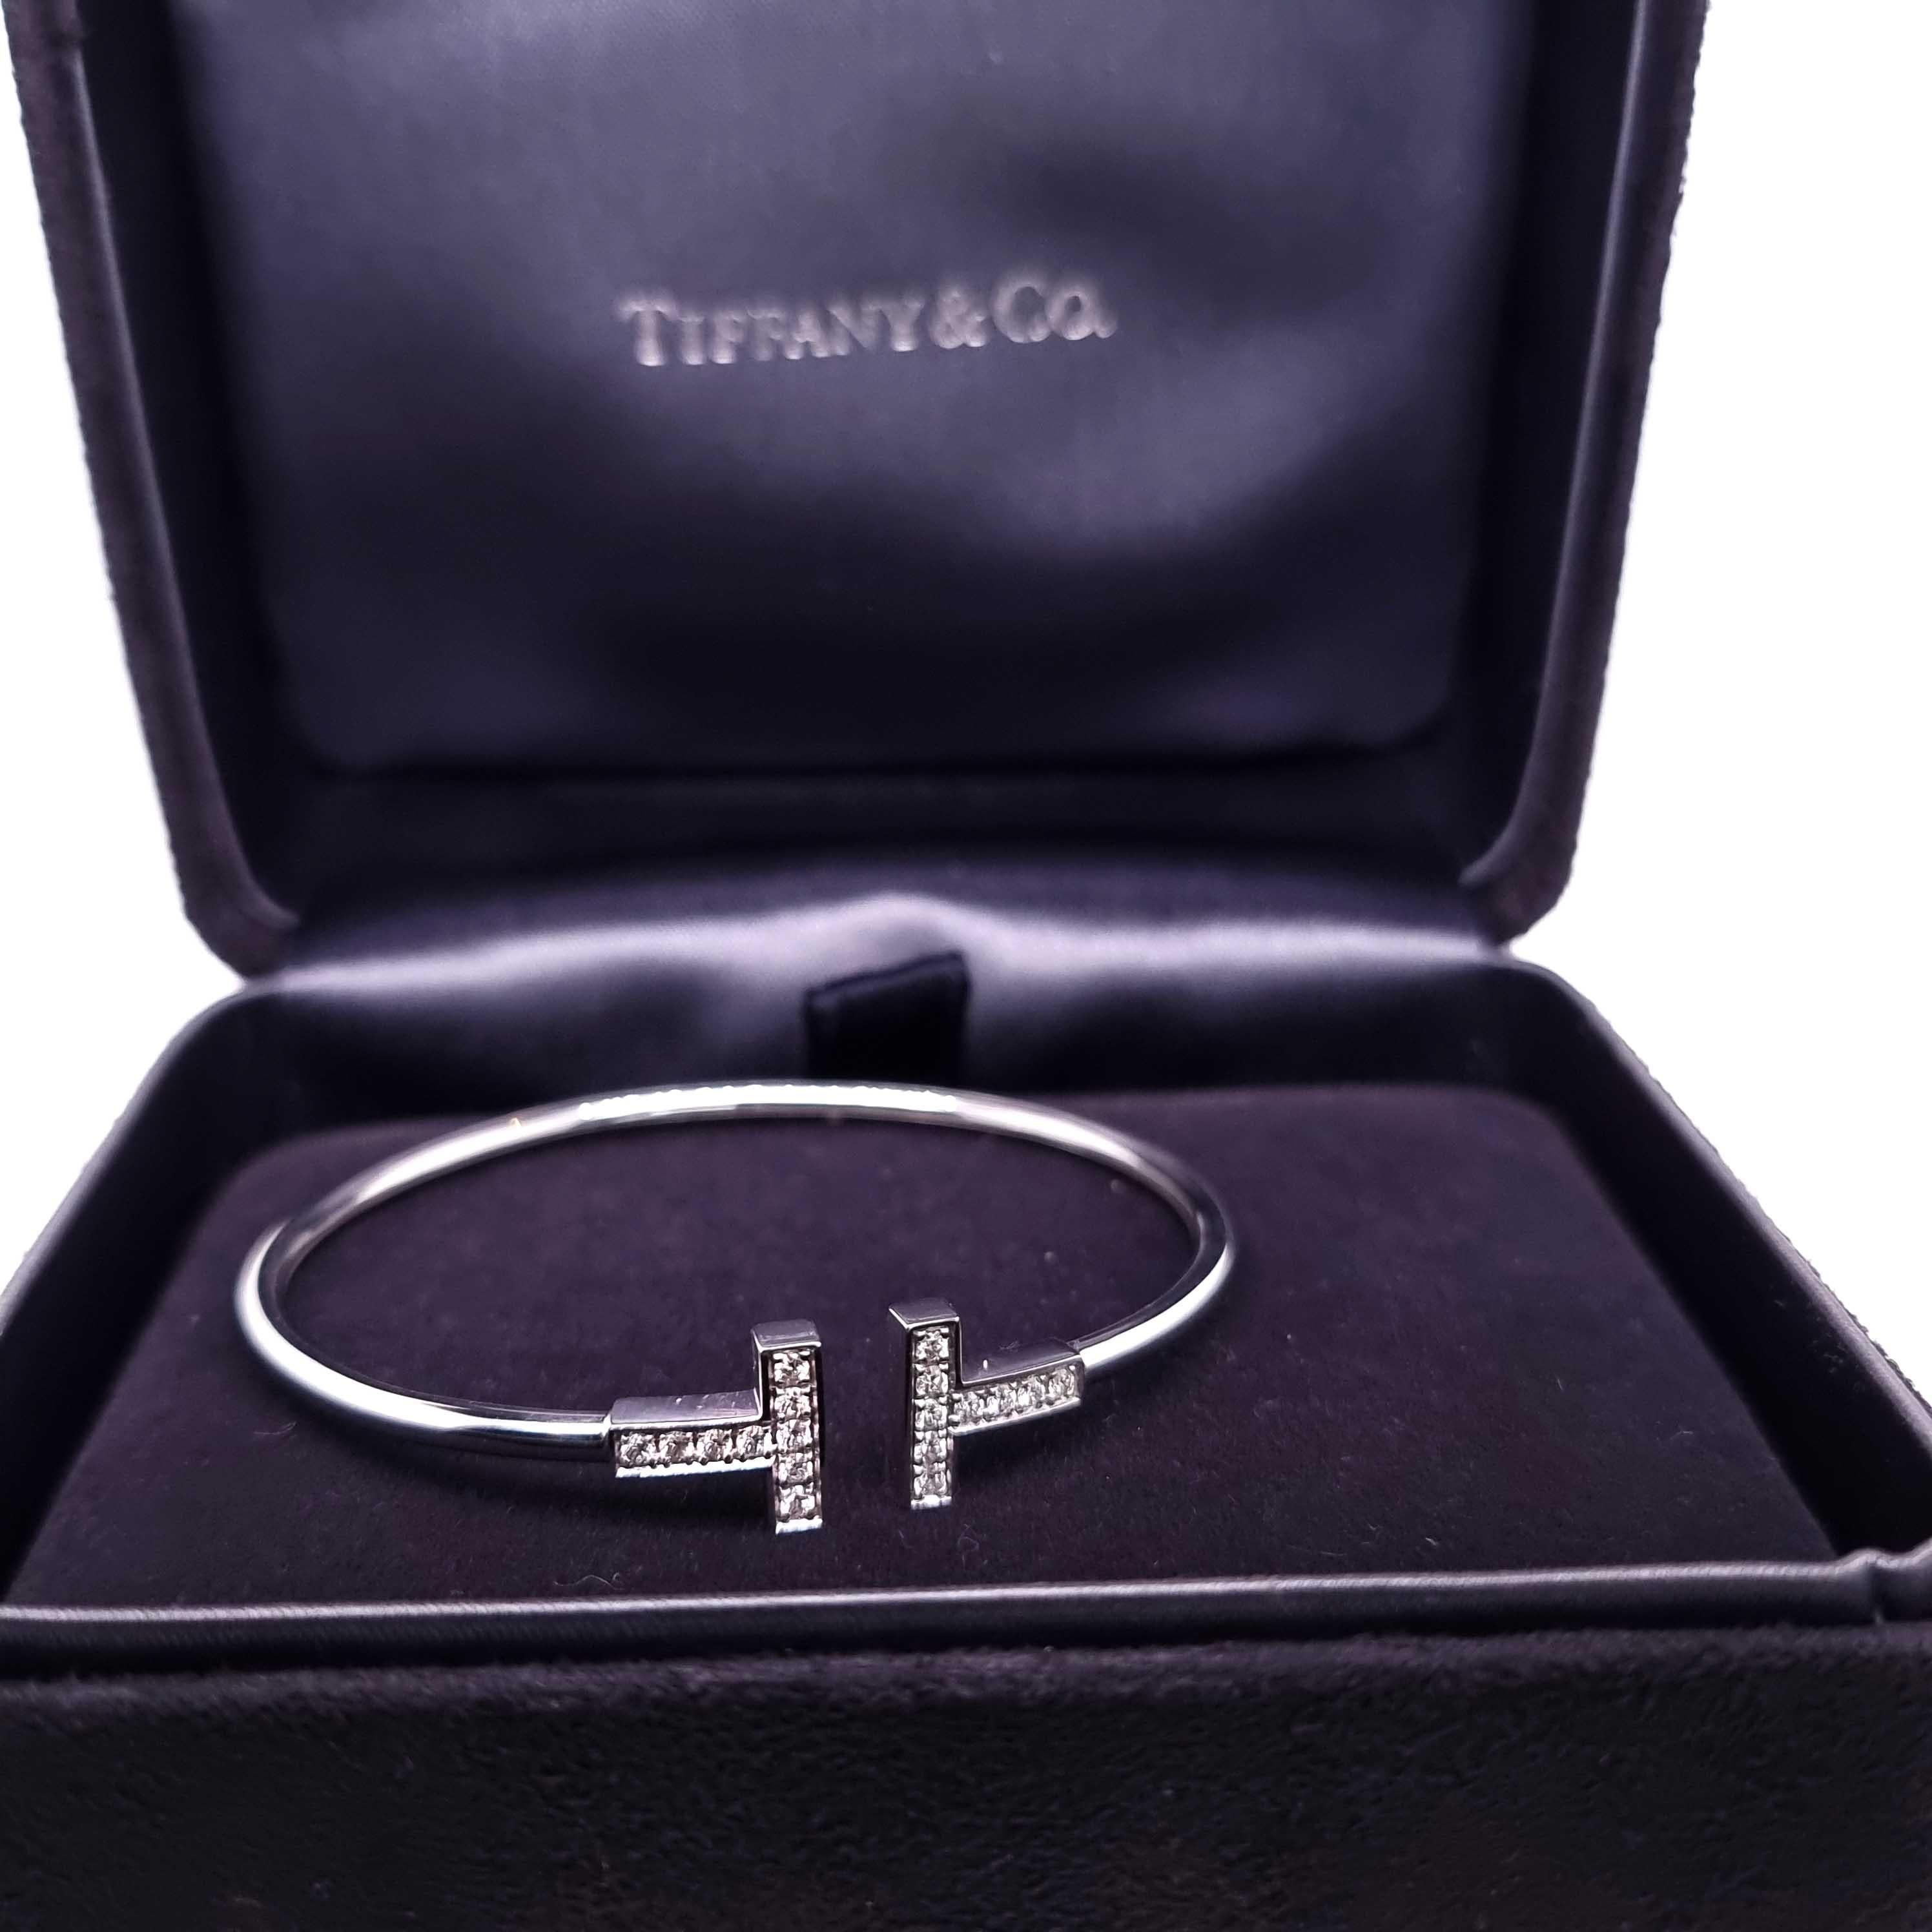 Unique features:
Graphic angles and clean lines blend to create the beautiful clarity of the Tiffany T collection. Brilliant diamonds enhance this bracelet's timeless elegance.

18k white gold with round brilliant diamonds
Carat total weight